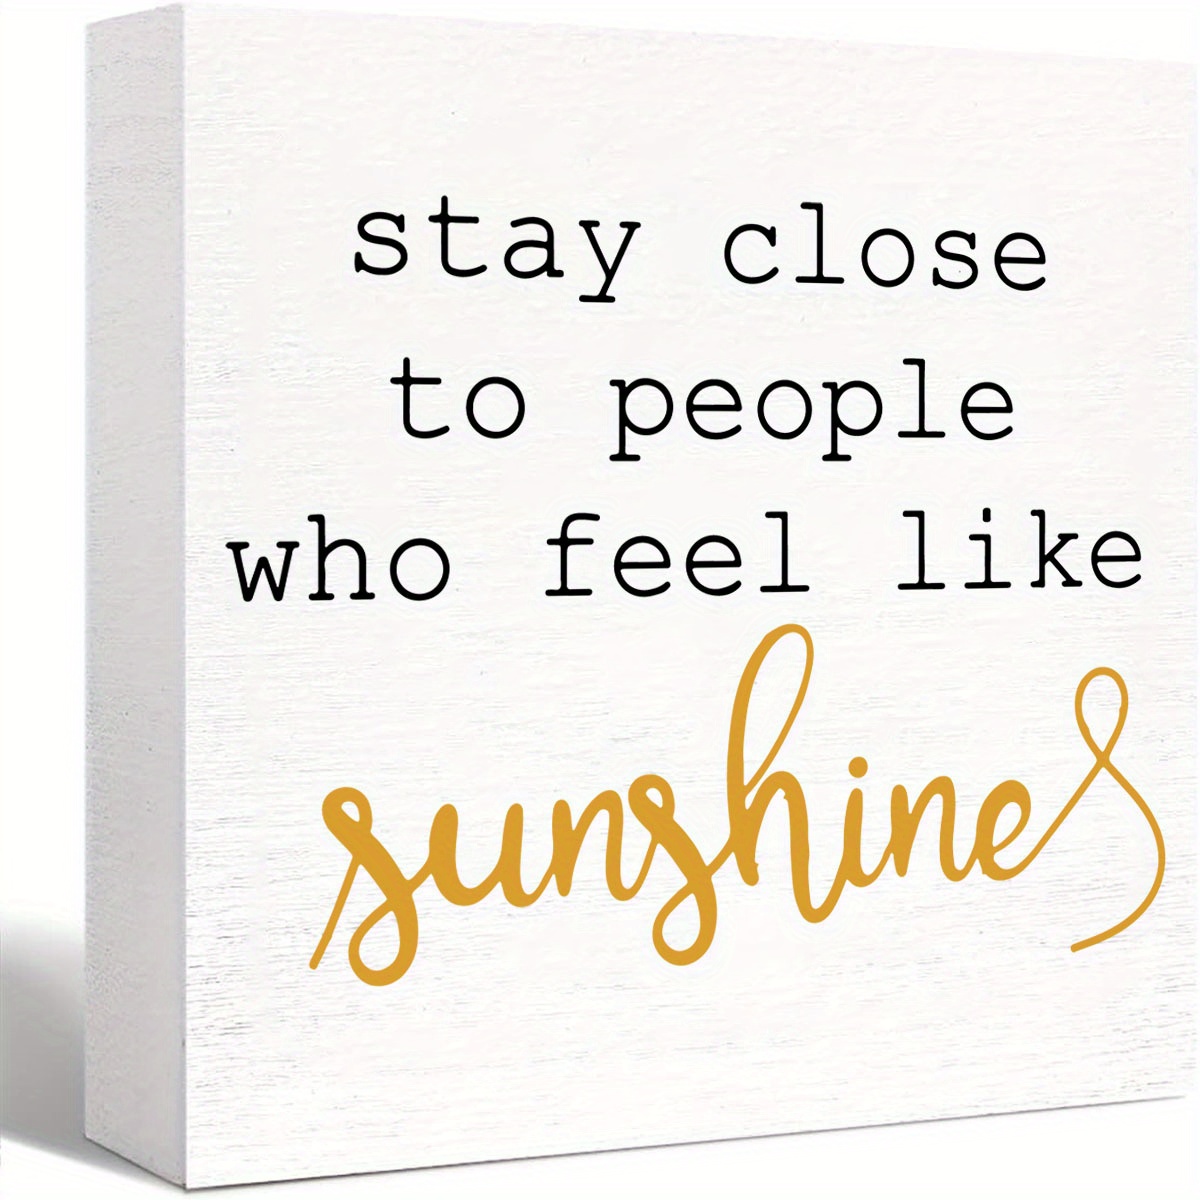 

1pc, Rustic Farmhouse Style Sunshine Saying Box Sign, Wood Desk Sign Decor, Stay Close To People Who Feel Like Sunshine Wooden Block Plaque Box Sign, Home Office Decorations